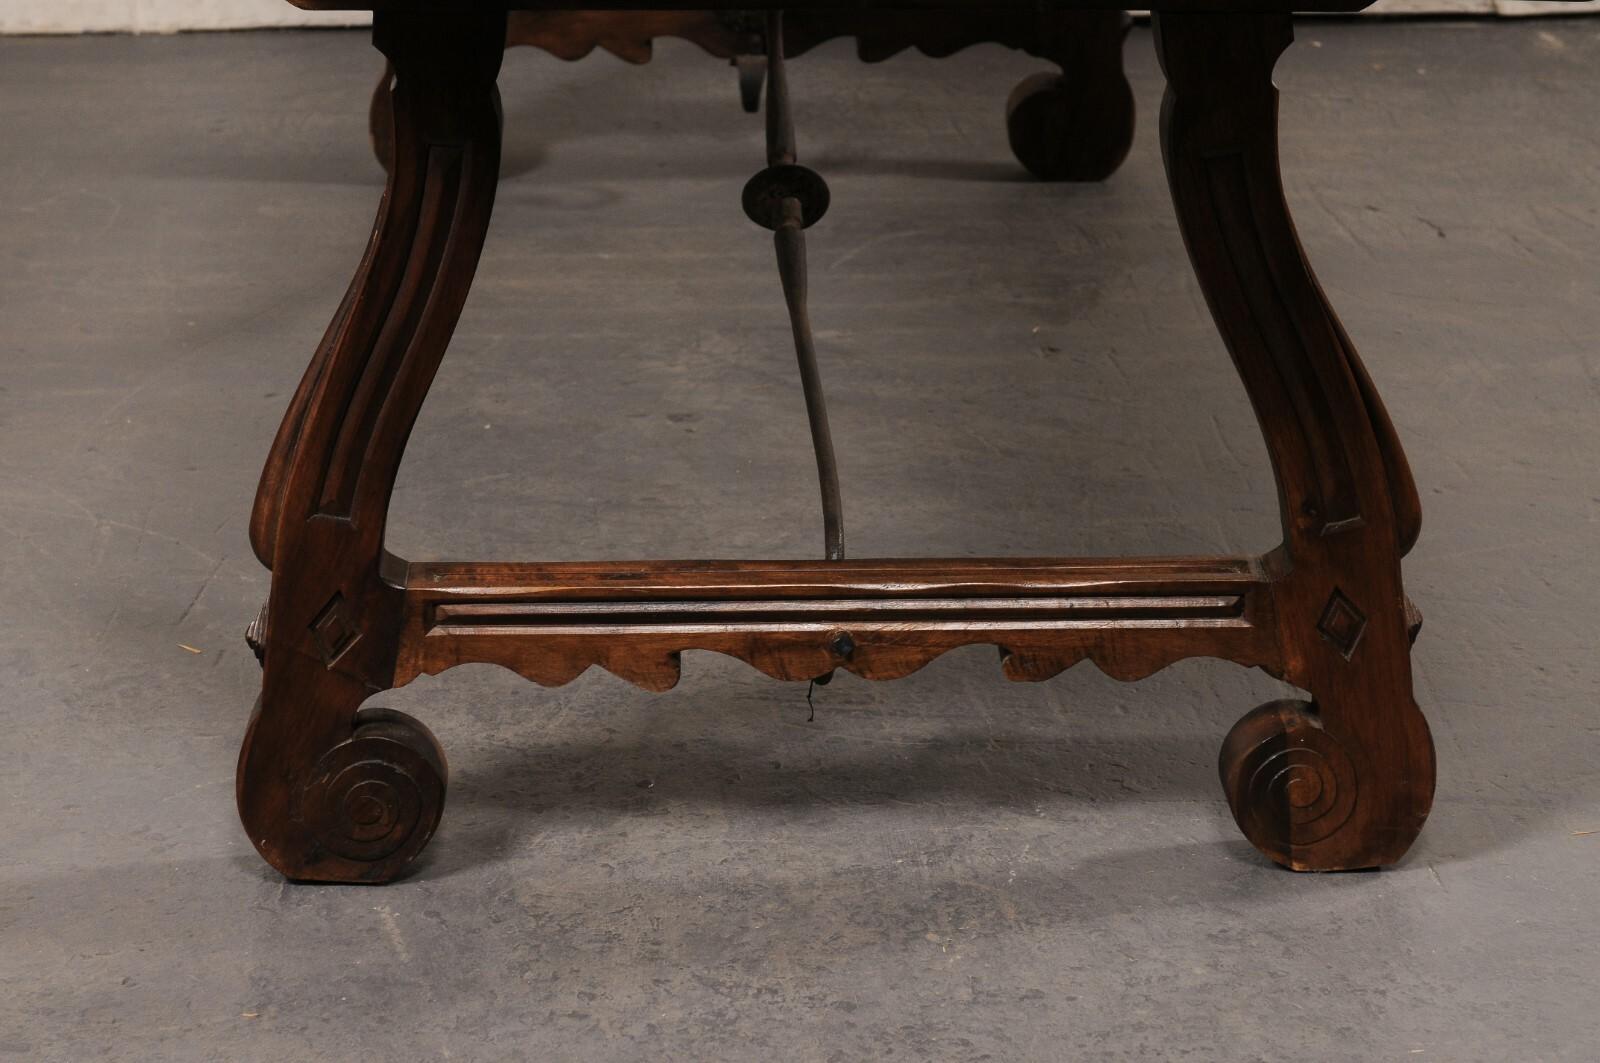 Spanish Carved Walnut Wood Trestle-Leg Table w/Forged Iron Stretcher, 8+ Ft Long For Sale 4